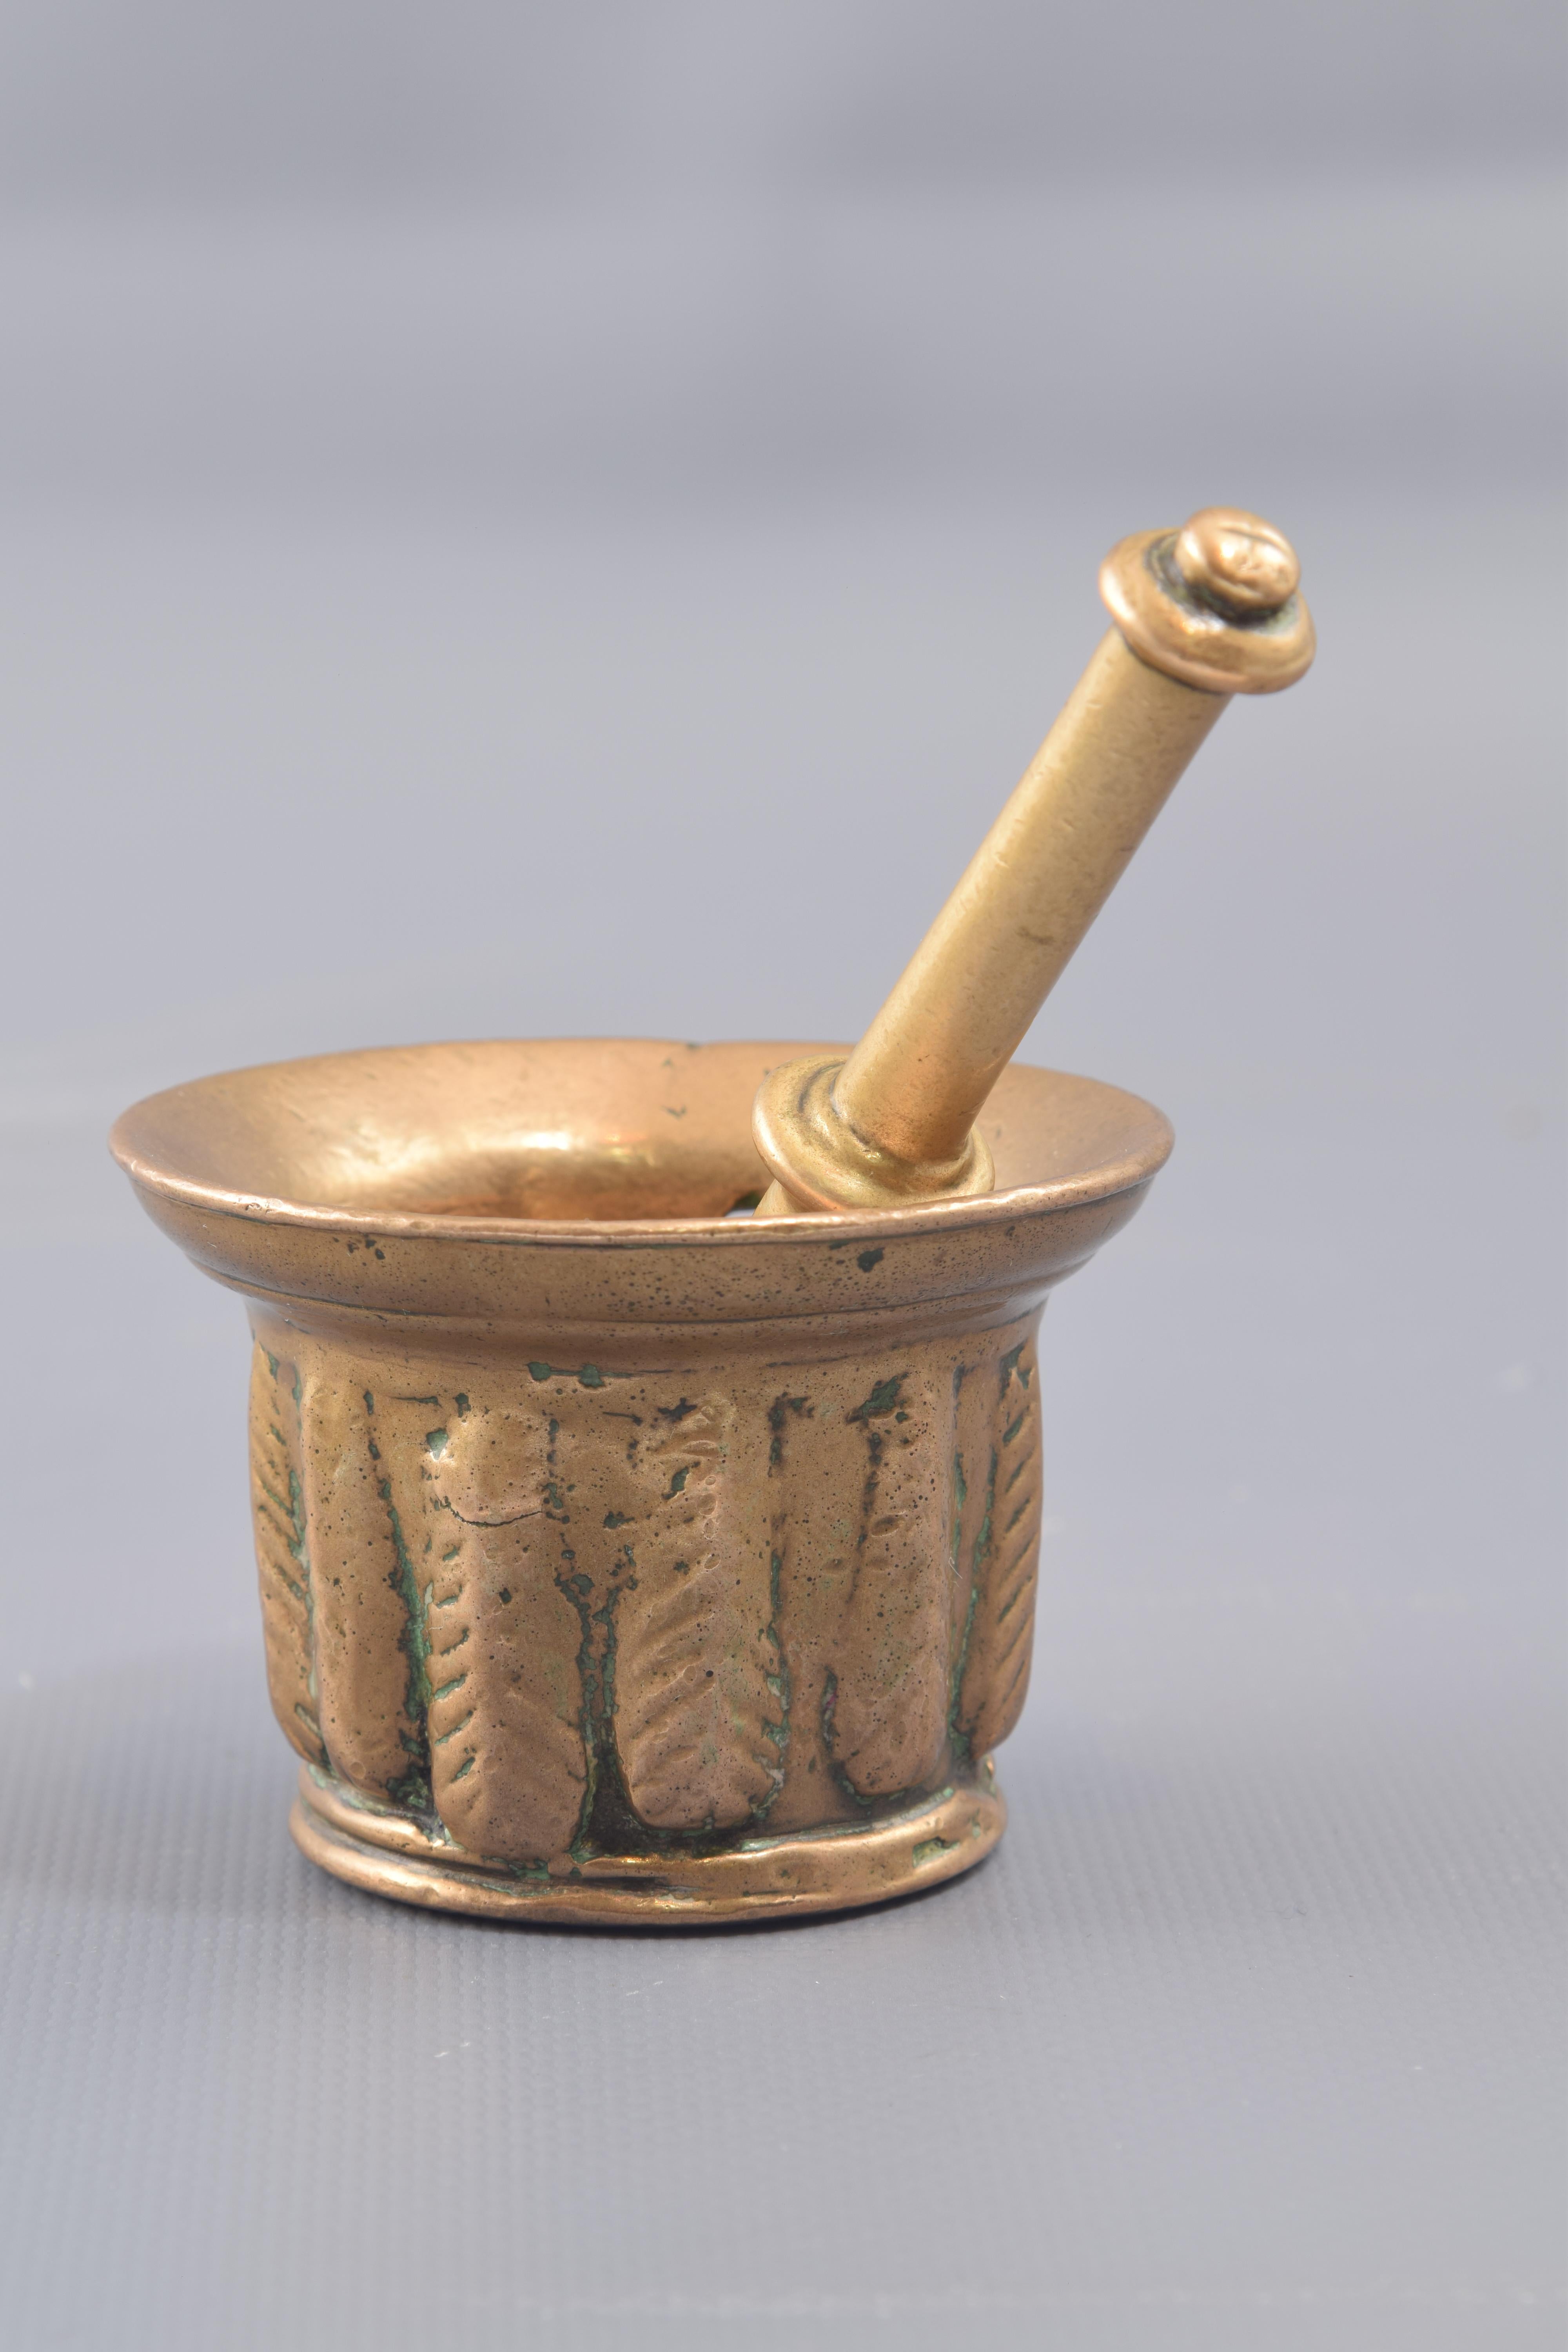 Poison mortar with mace. Bronze. Century XVI.
Small mortar with mace made of bronze, decorated with a band of vertical shapes that resemble leaves rather than ribs and this one with straight shaft widened at the end and a series of protruding